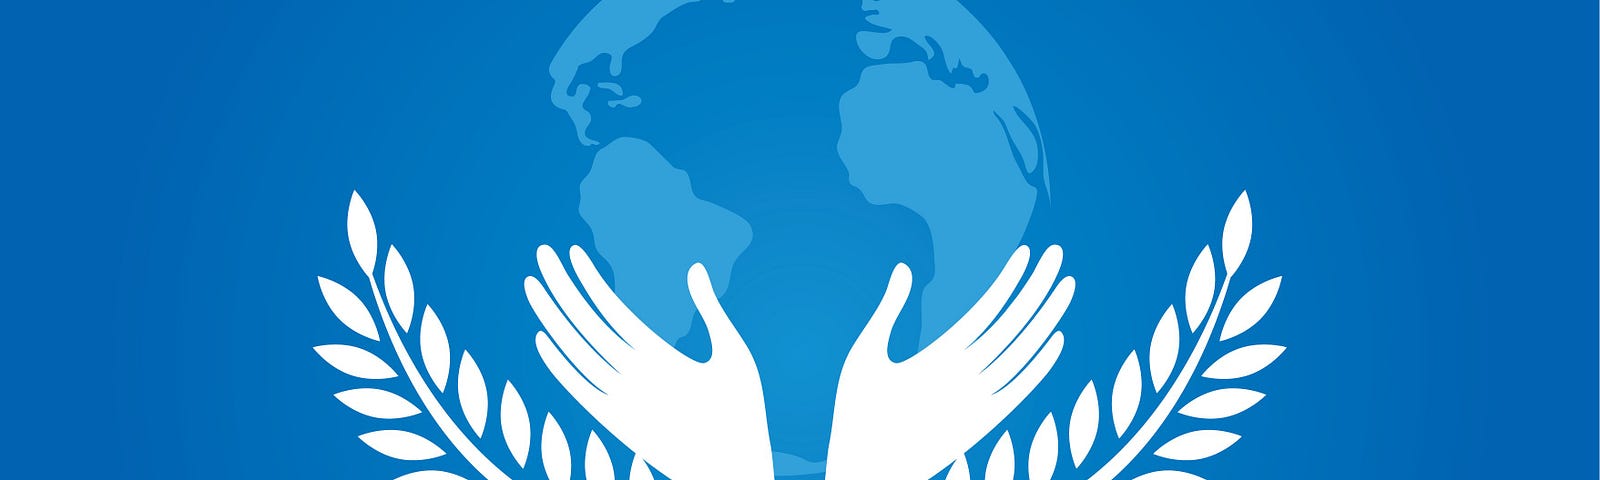 Blue background image with a faded world in the background. Two hands in white branch out from olive branches as the symbol for Social Justice. The words “World Day of Social Justice February 20” are written underneath